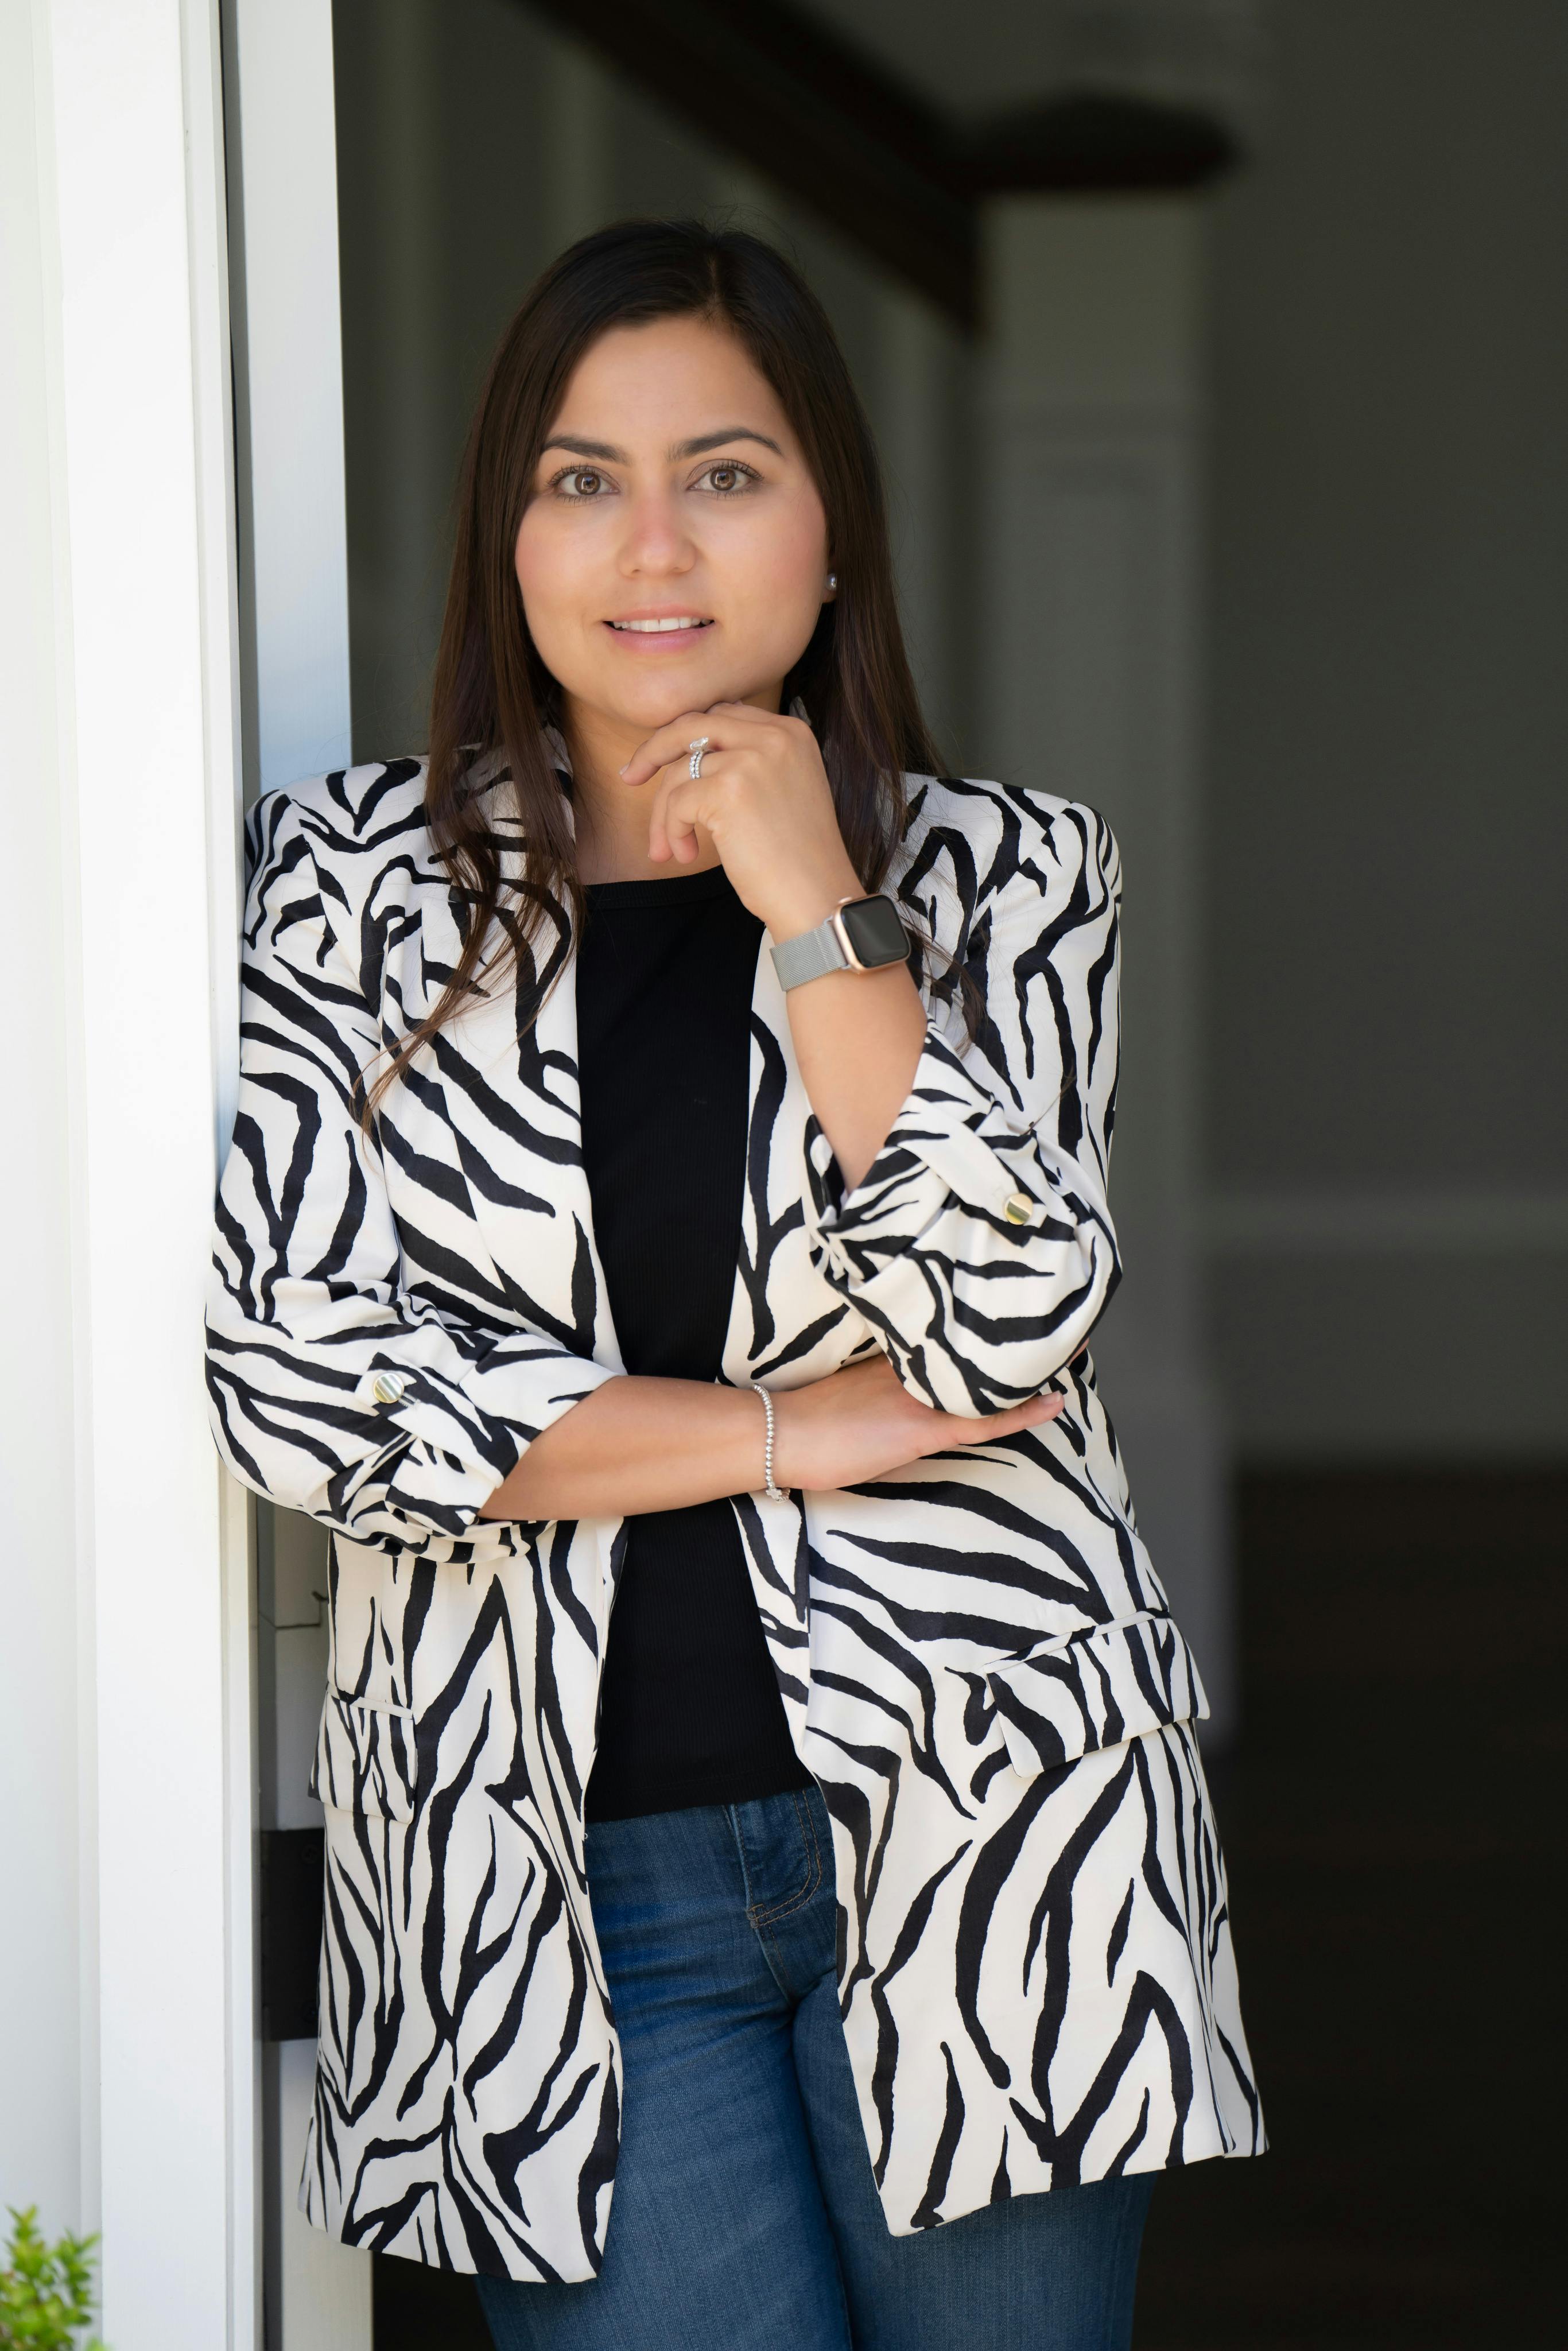 Andrea Brink stands leaning against a white doorframe. She is wearing a striking zebra print blazer over a black top, paired with blue jeans. Her arms are crossed, and she accessorizes with a silver watch and a simple bracelet on her left wrist. Her gaze is direct and thoughtful, with a slight smile on her face, suggesting a professional and approachable demeanor.